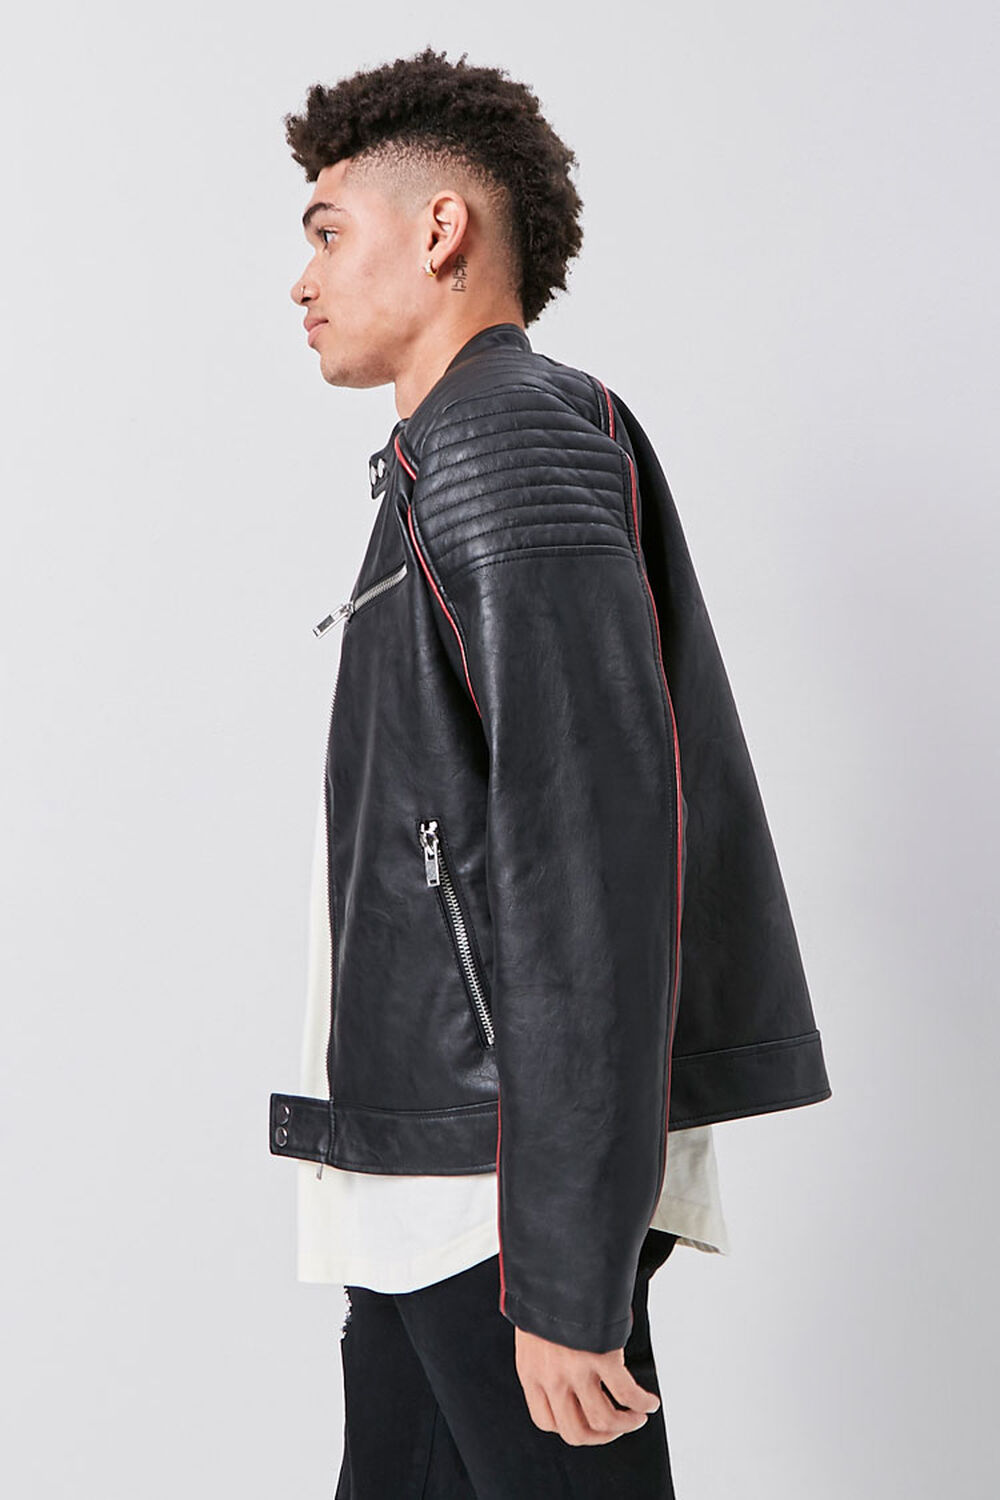 BLACK/RED Faux Leather Piped-Trim Bomber Jacket, image 2